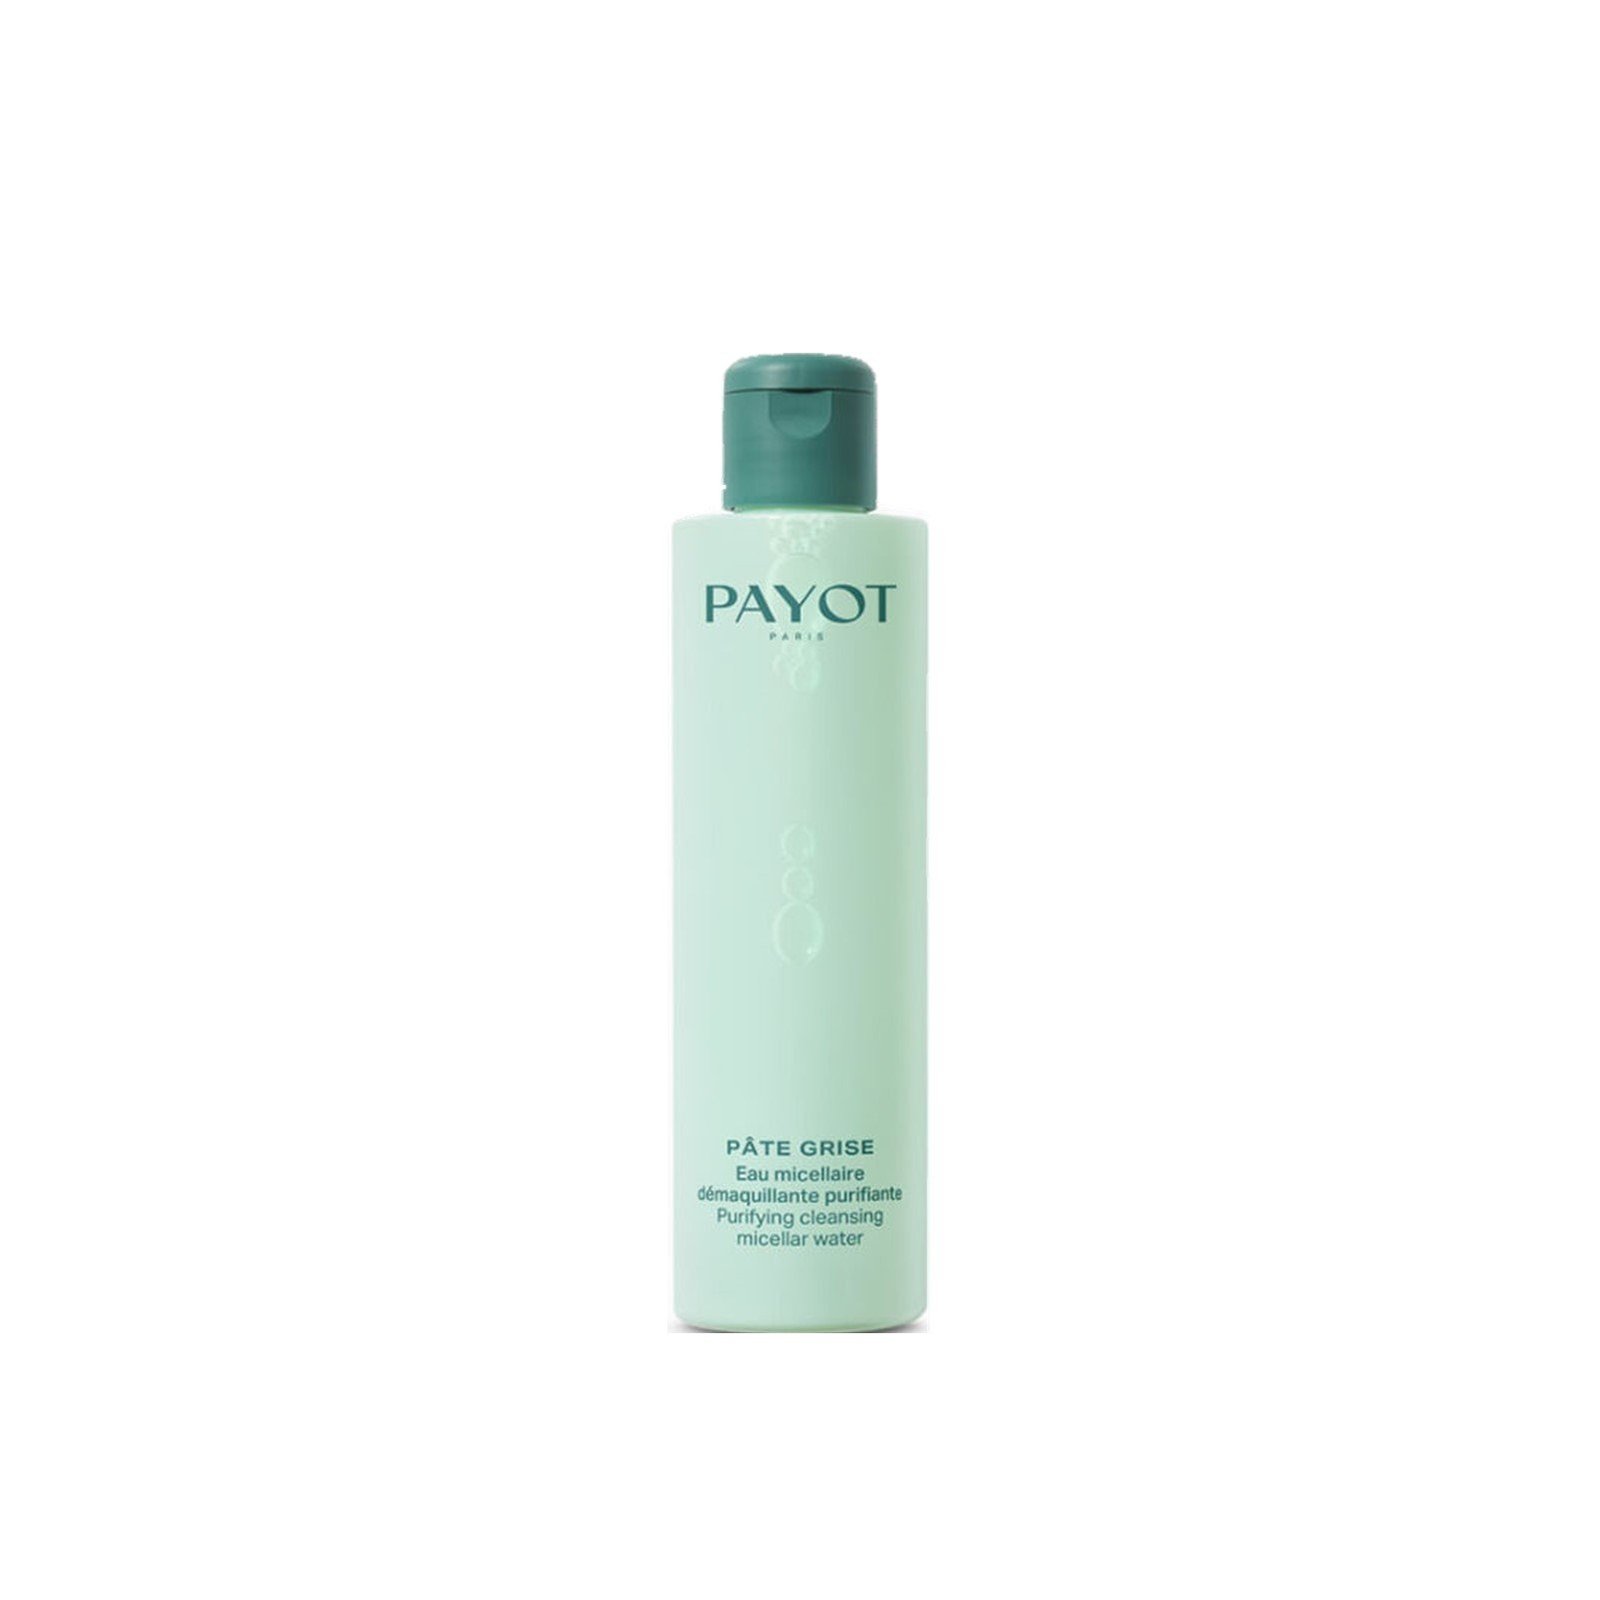 Payot Pâte Grise Purifying Cleansing Micellar Water 200ml